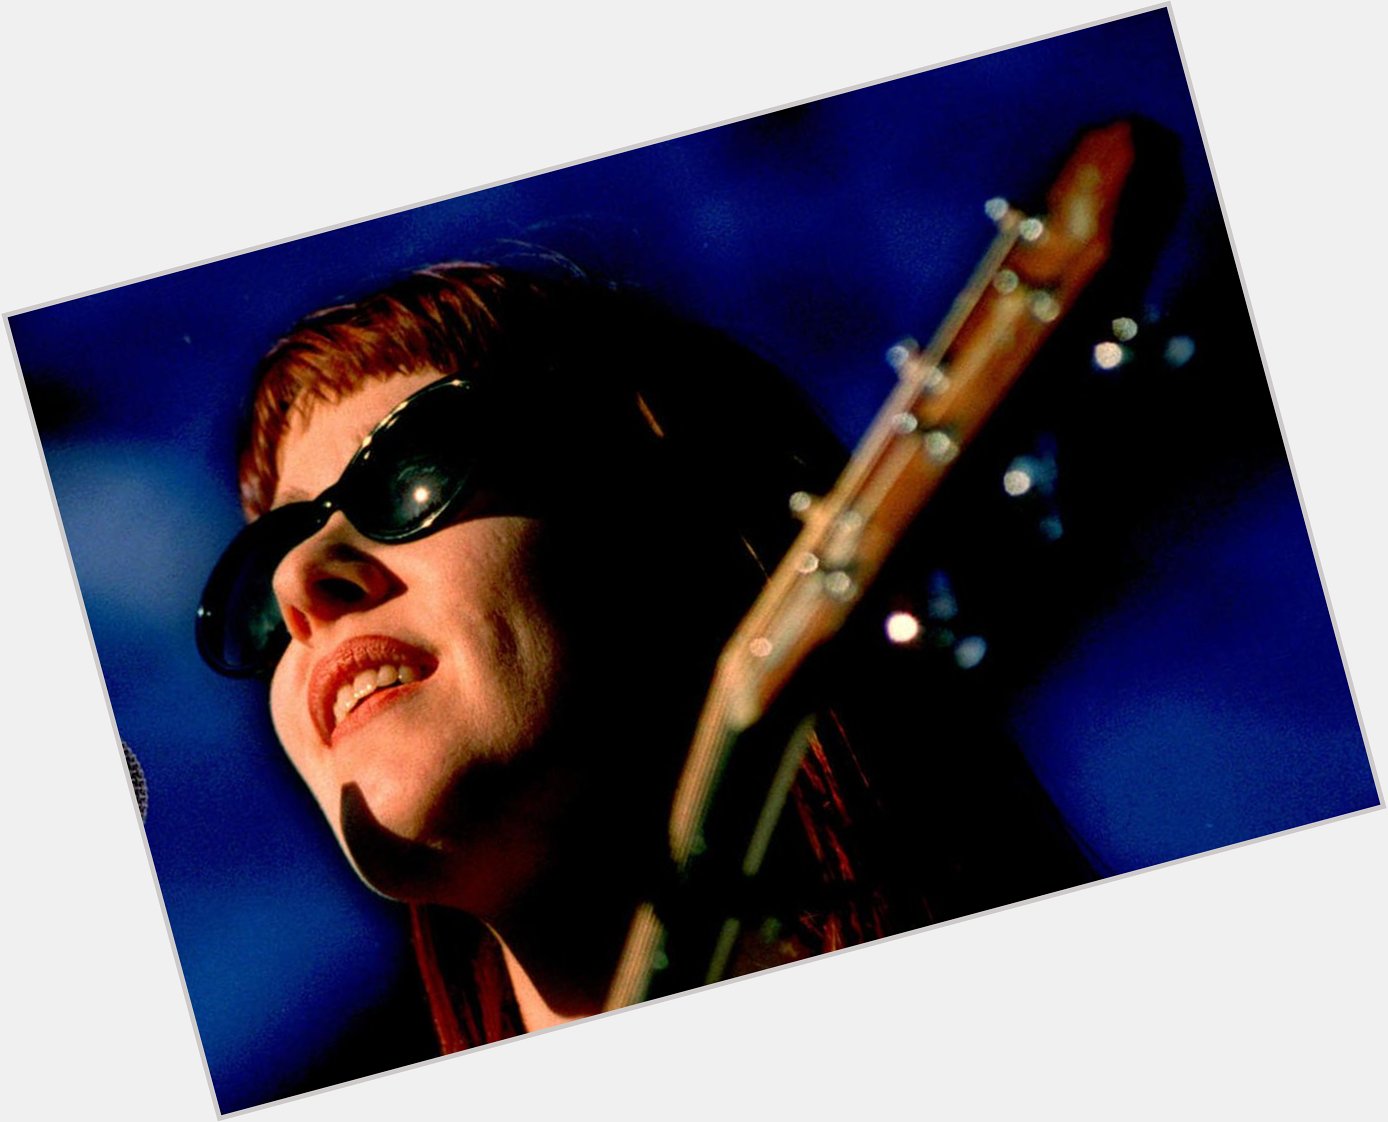 Happy birthday, Suzanne Vega! The singer-songwriter turns 59 today  